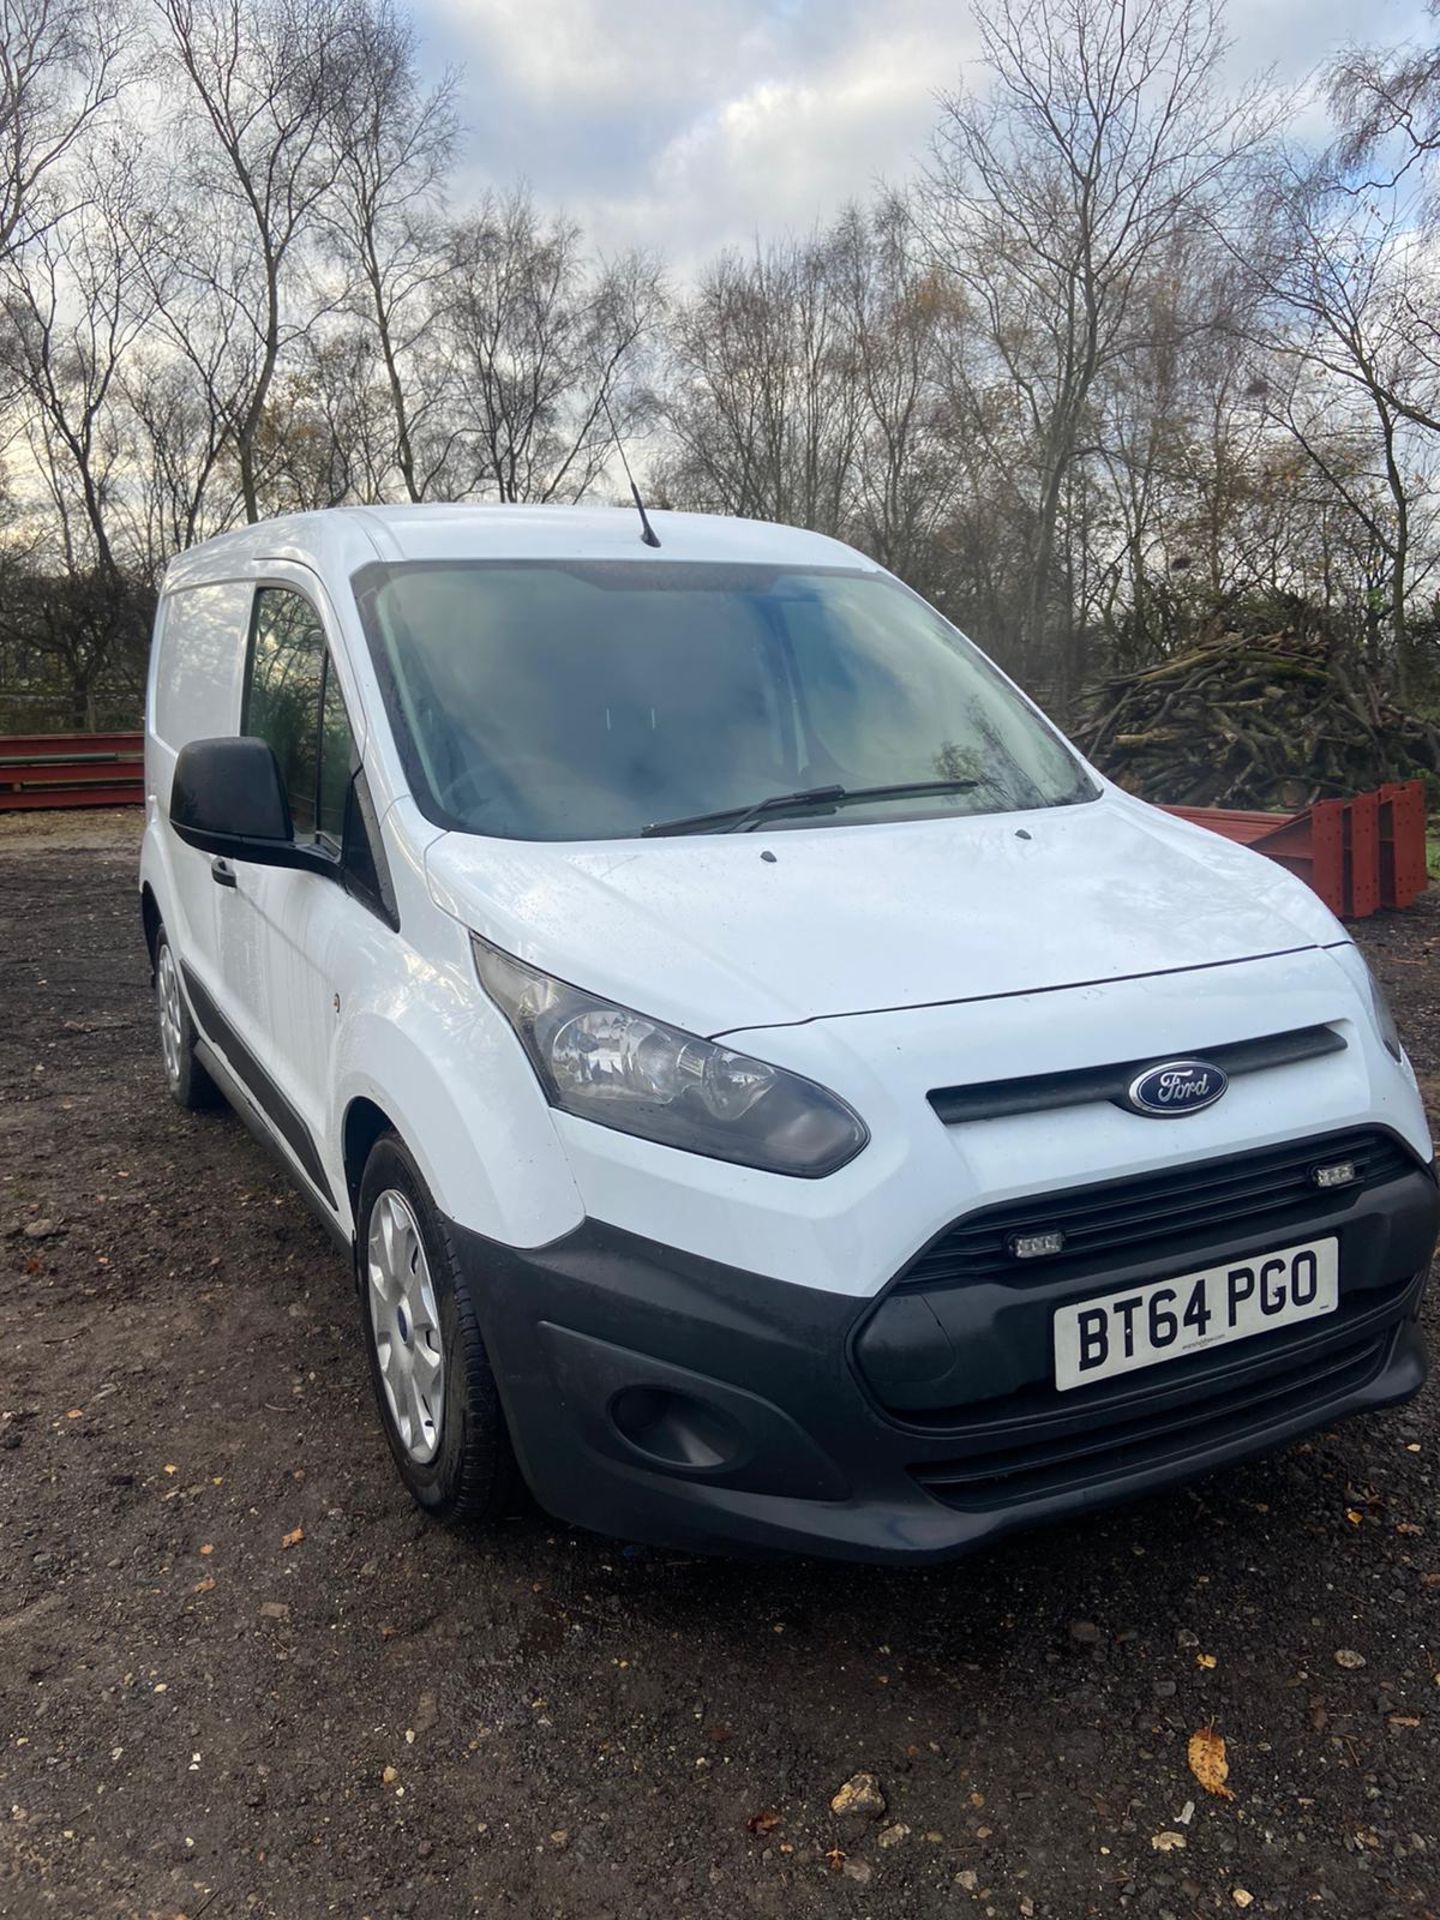 2015/64 REG FORD TRANSIT CONNECT 200 ECONETIC 1.6 DIESEL WHITE PANEL VAN, SHOWING 0 FORMER KEEPERS - Image 2 of 10